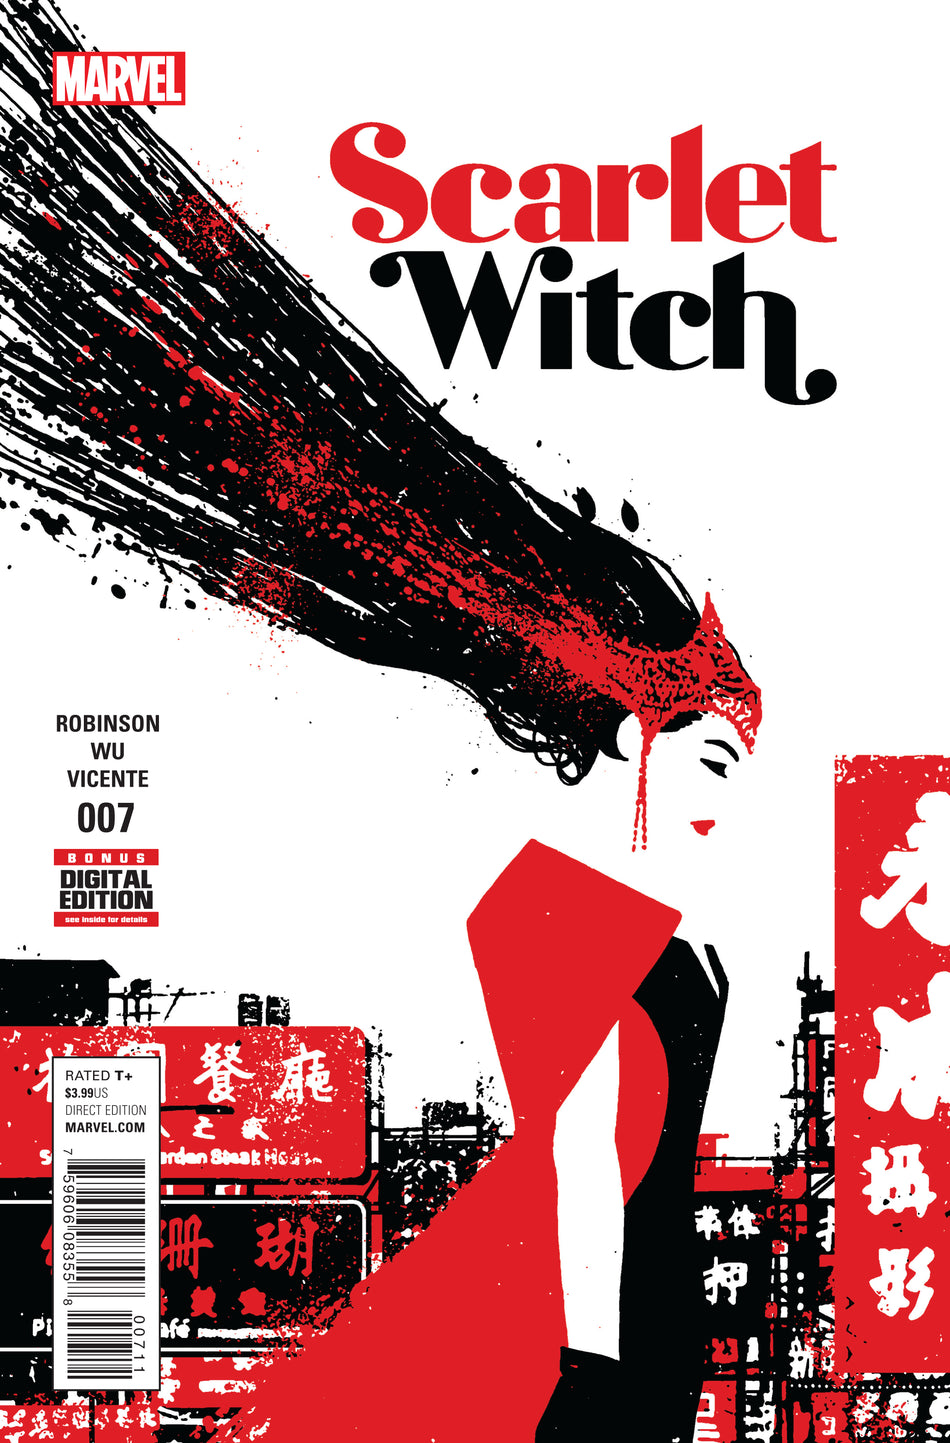 Photo of Scarlet Witch Issue 7 comic sold by Stronghold Collectibles